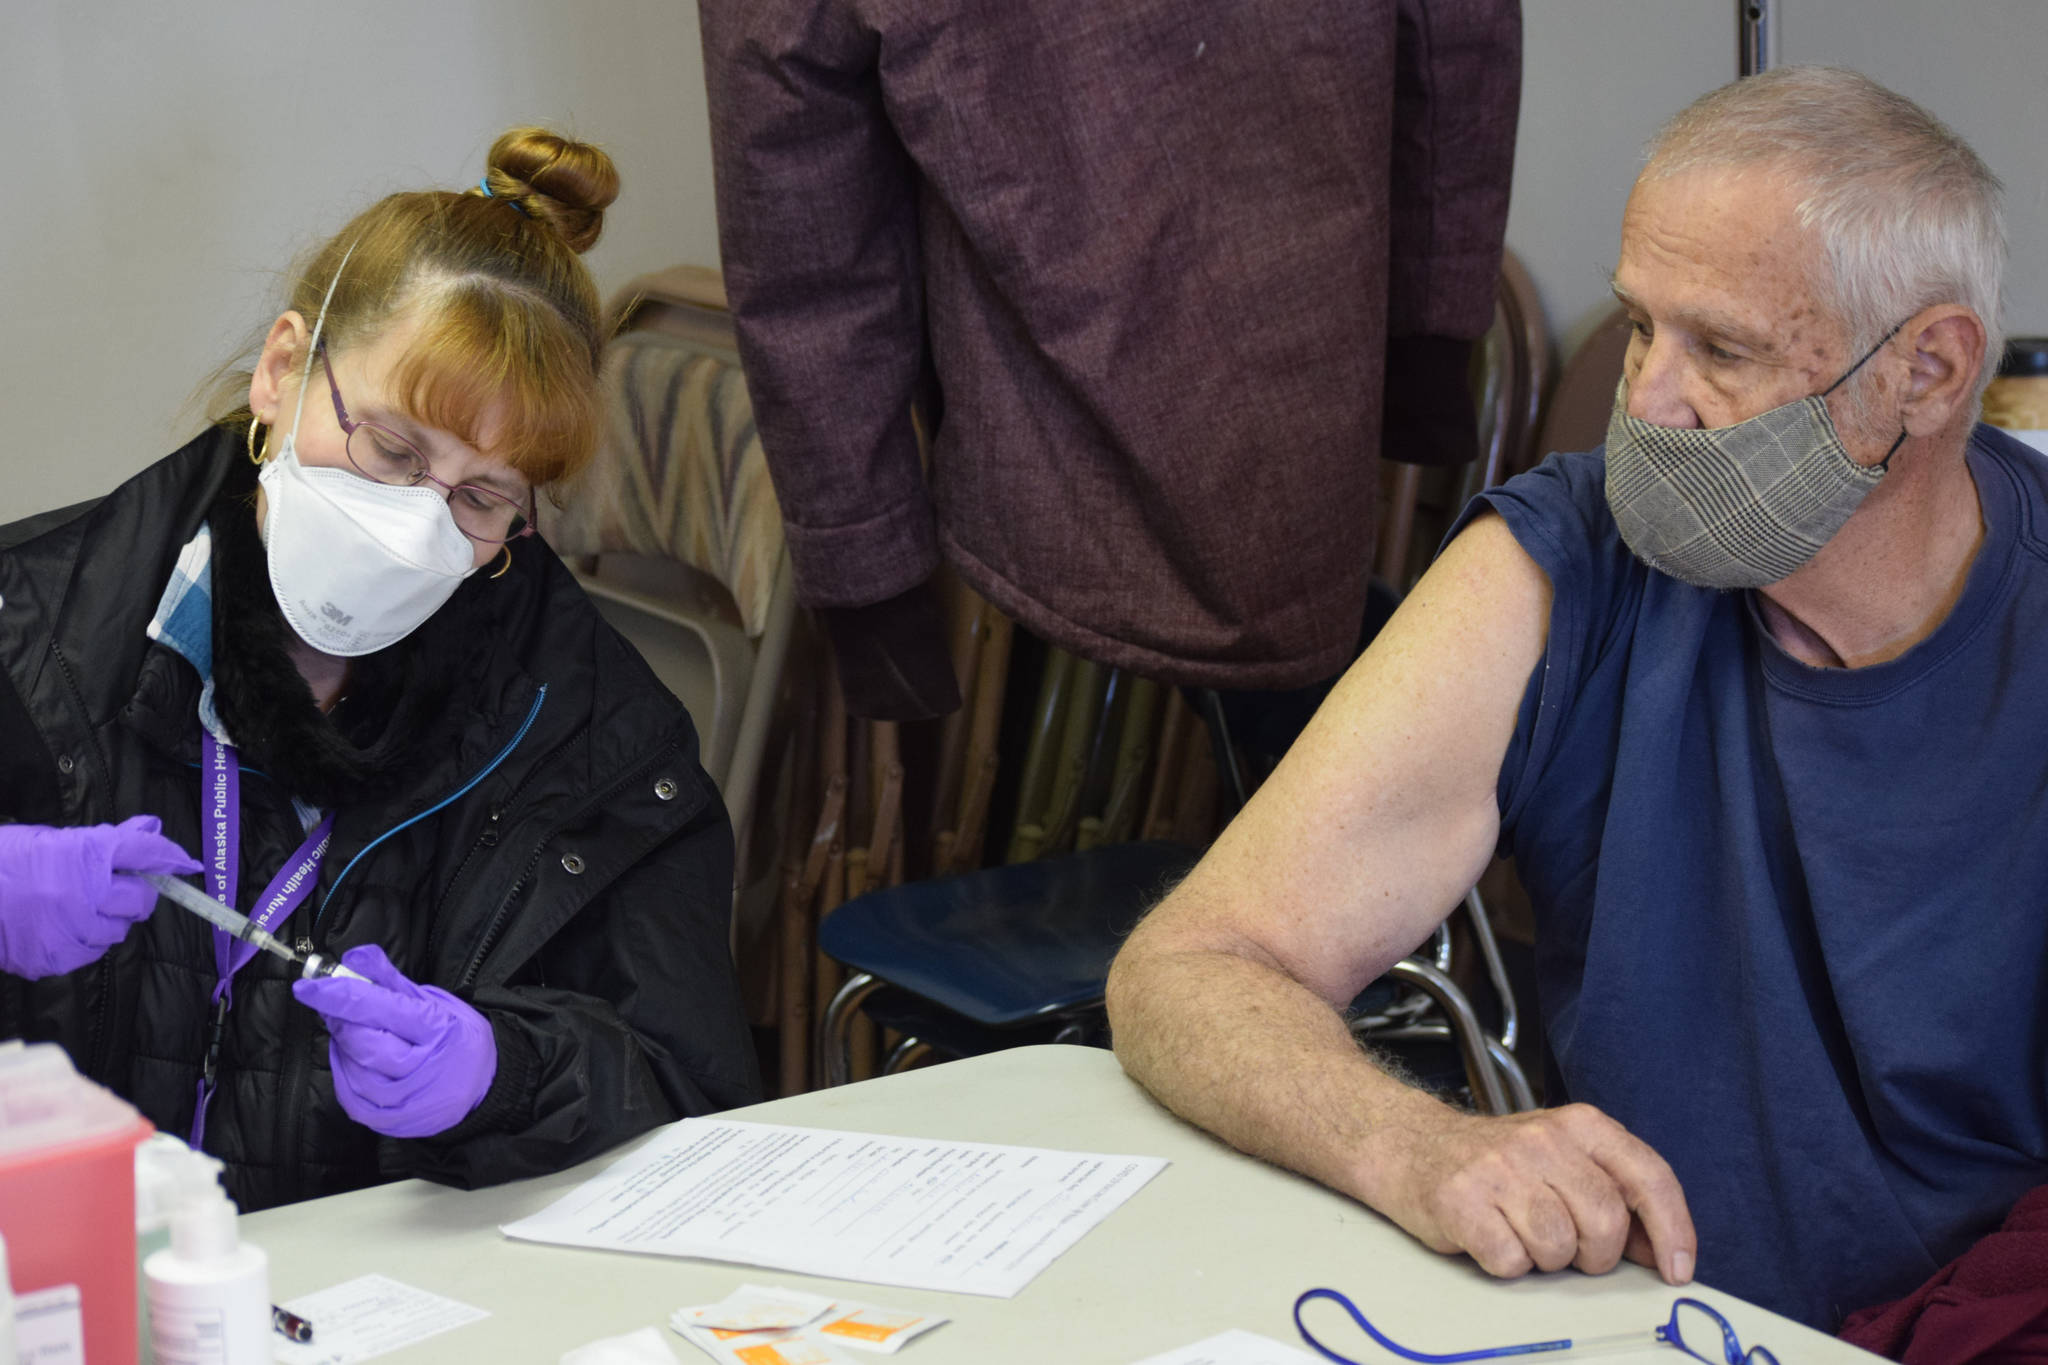 Public Health Nurse Andrea Hooper prepares to administer the Janssen COVID-19 vaccine to Denny Thomas at the United Methodist Church in Kenai, Alaska on Monday, April 12, 2021. Public Health teamed up with the church to offer vaccines during its weekly food distribution event.